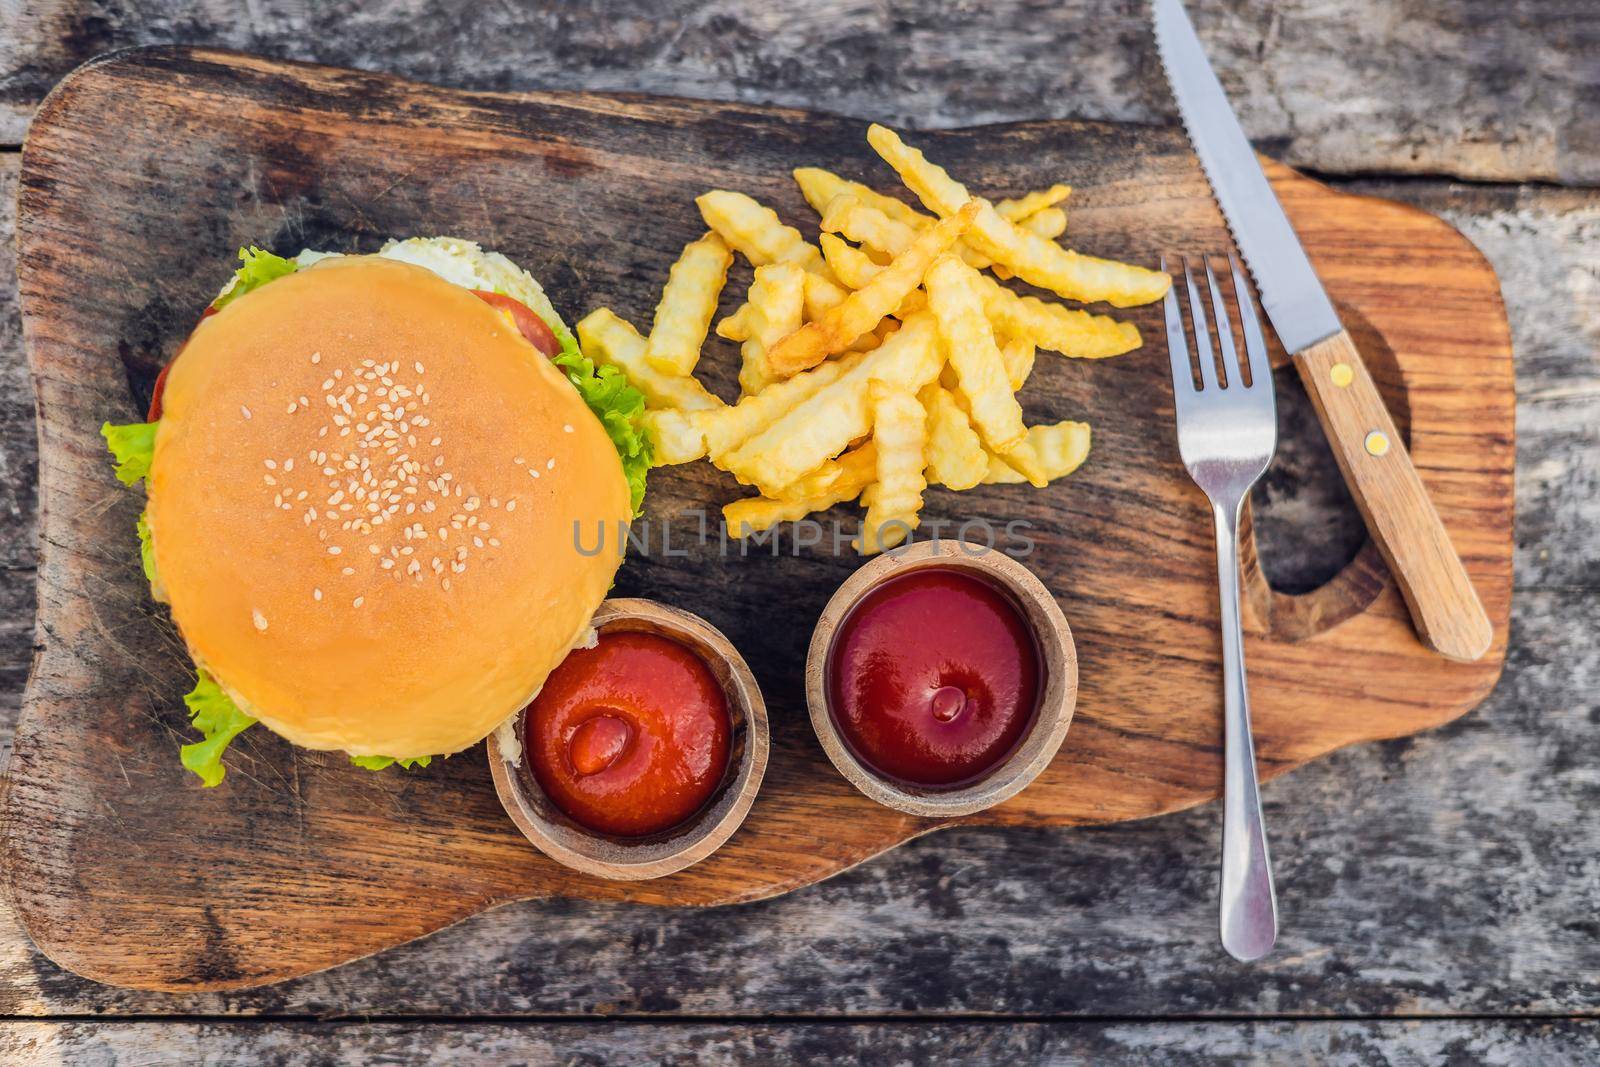 Closeup of fresh burger with French fries on wooden table with bowls of tomato sauce. lifestyle food.